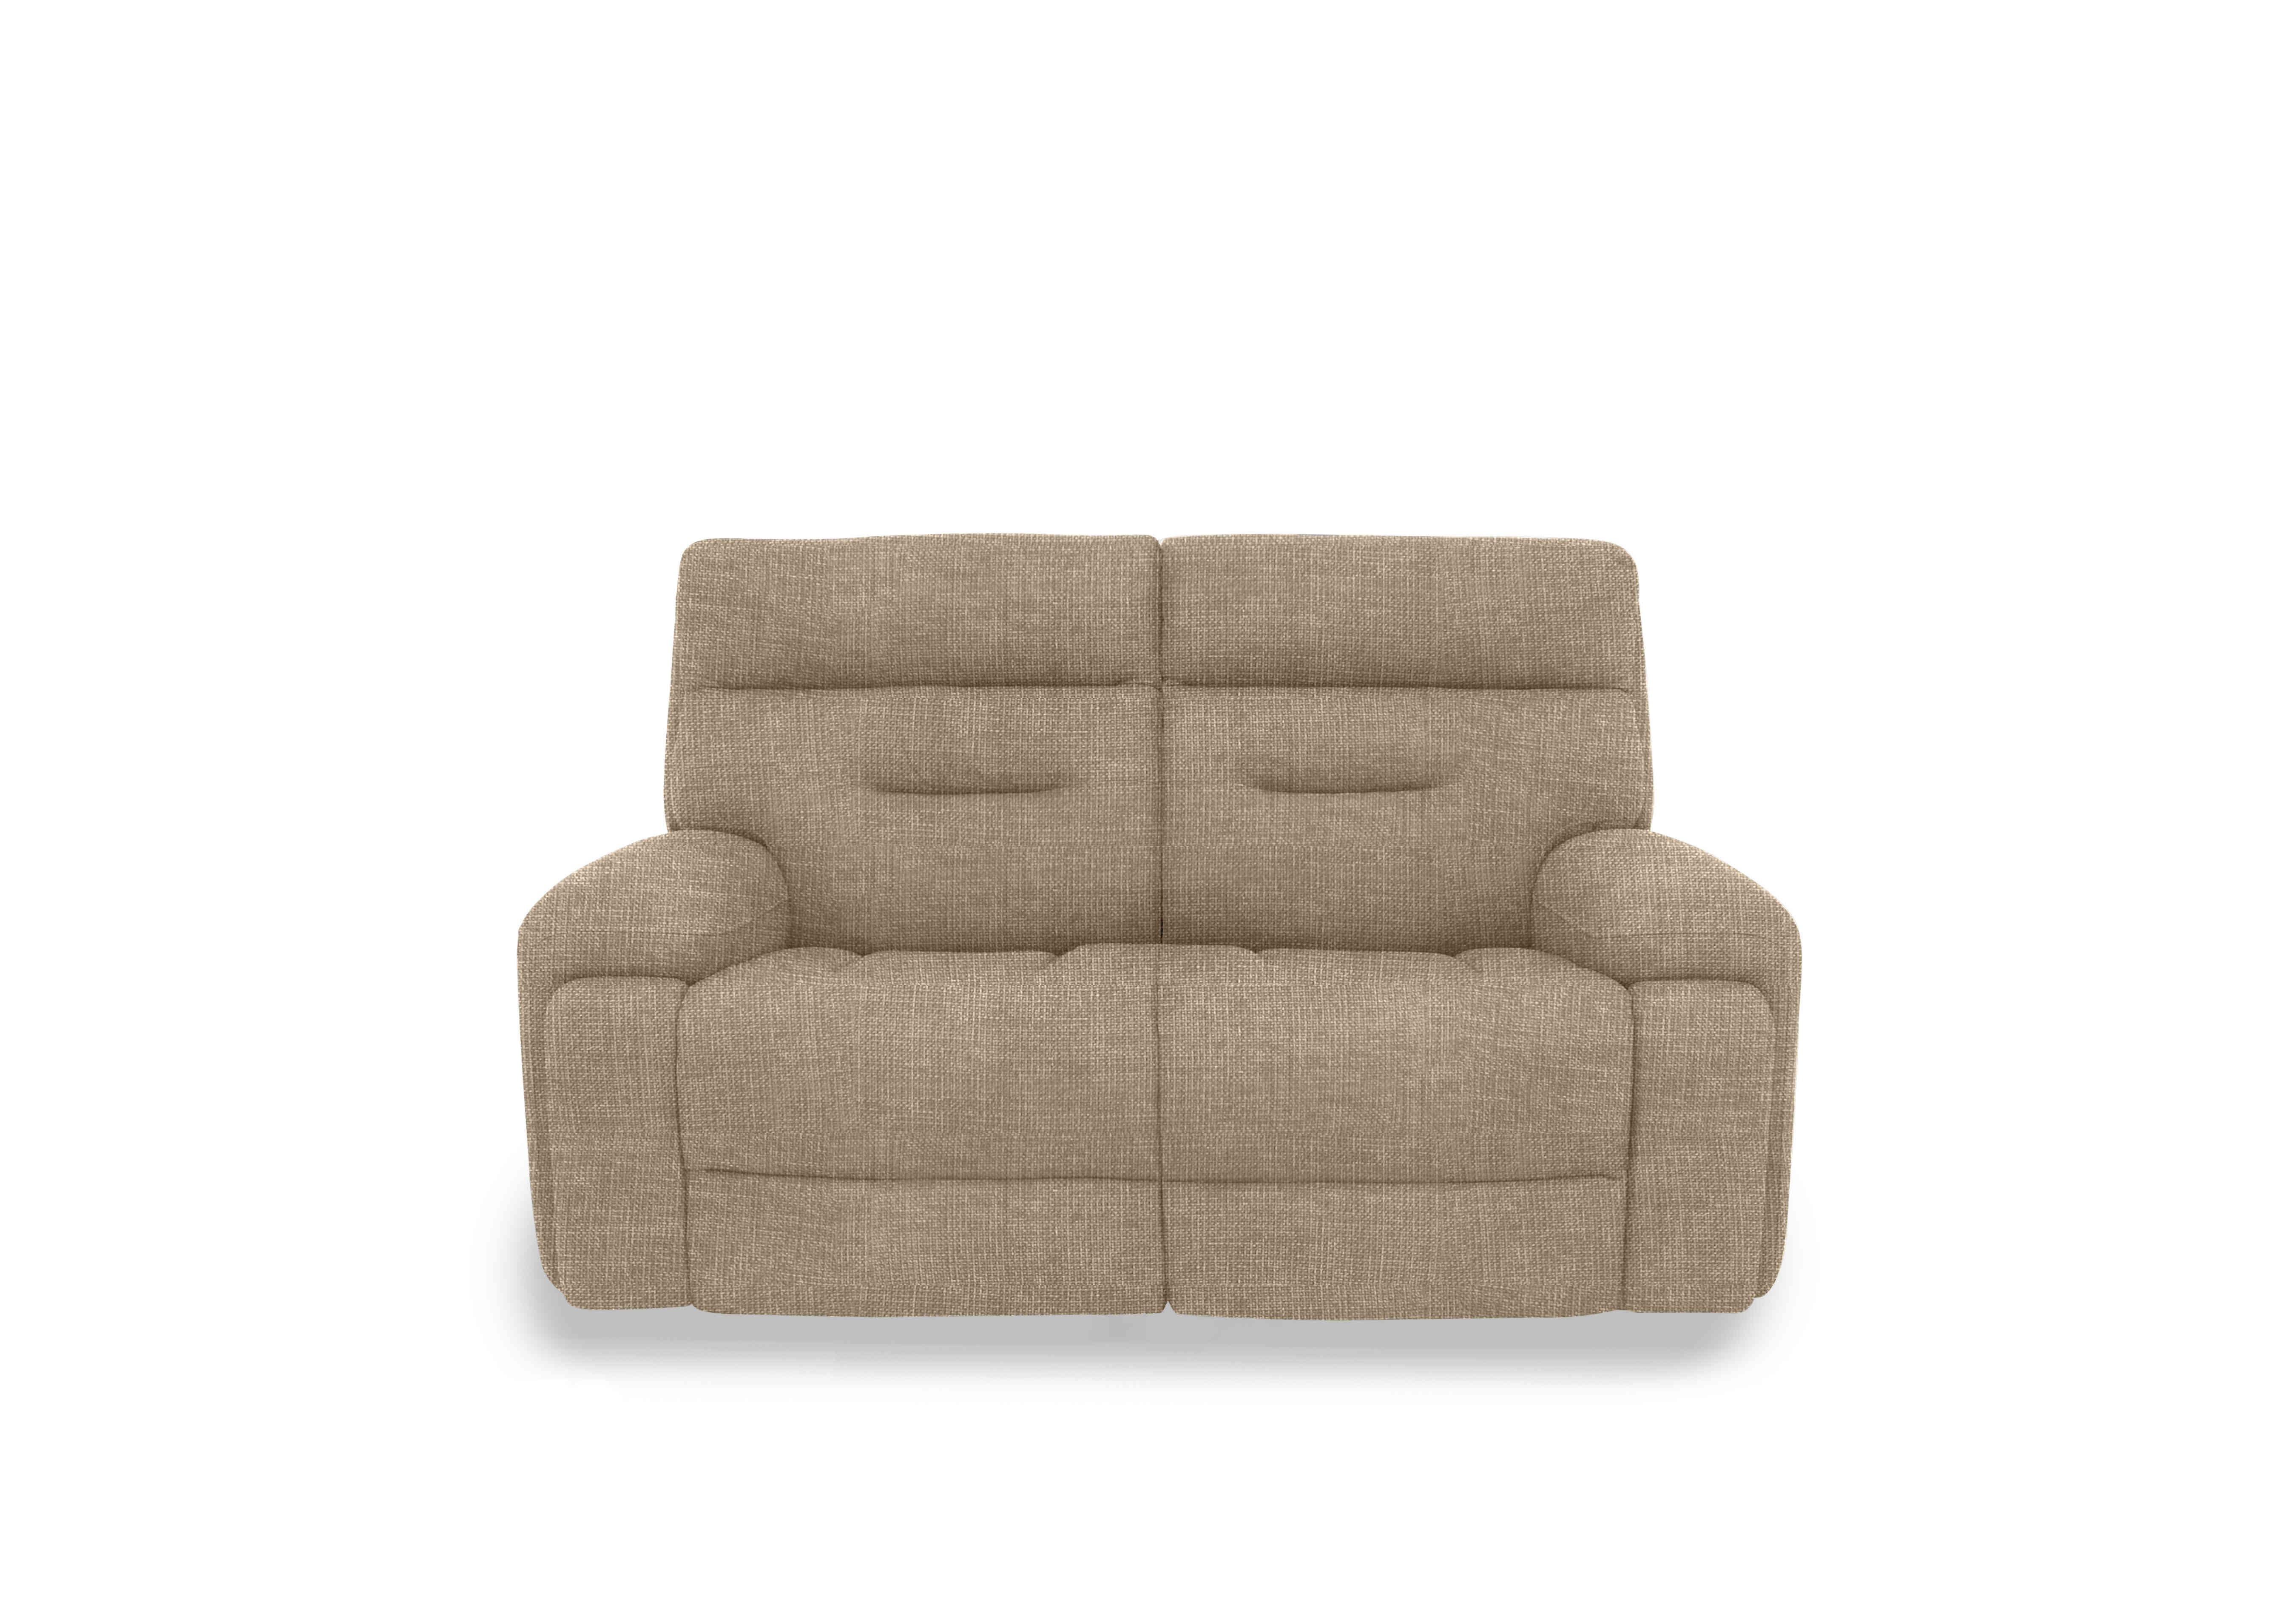 Cinemax 2 Seater Fabric Sofa in We-0103 Weave Cocoa on Furniture Village